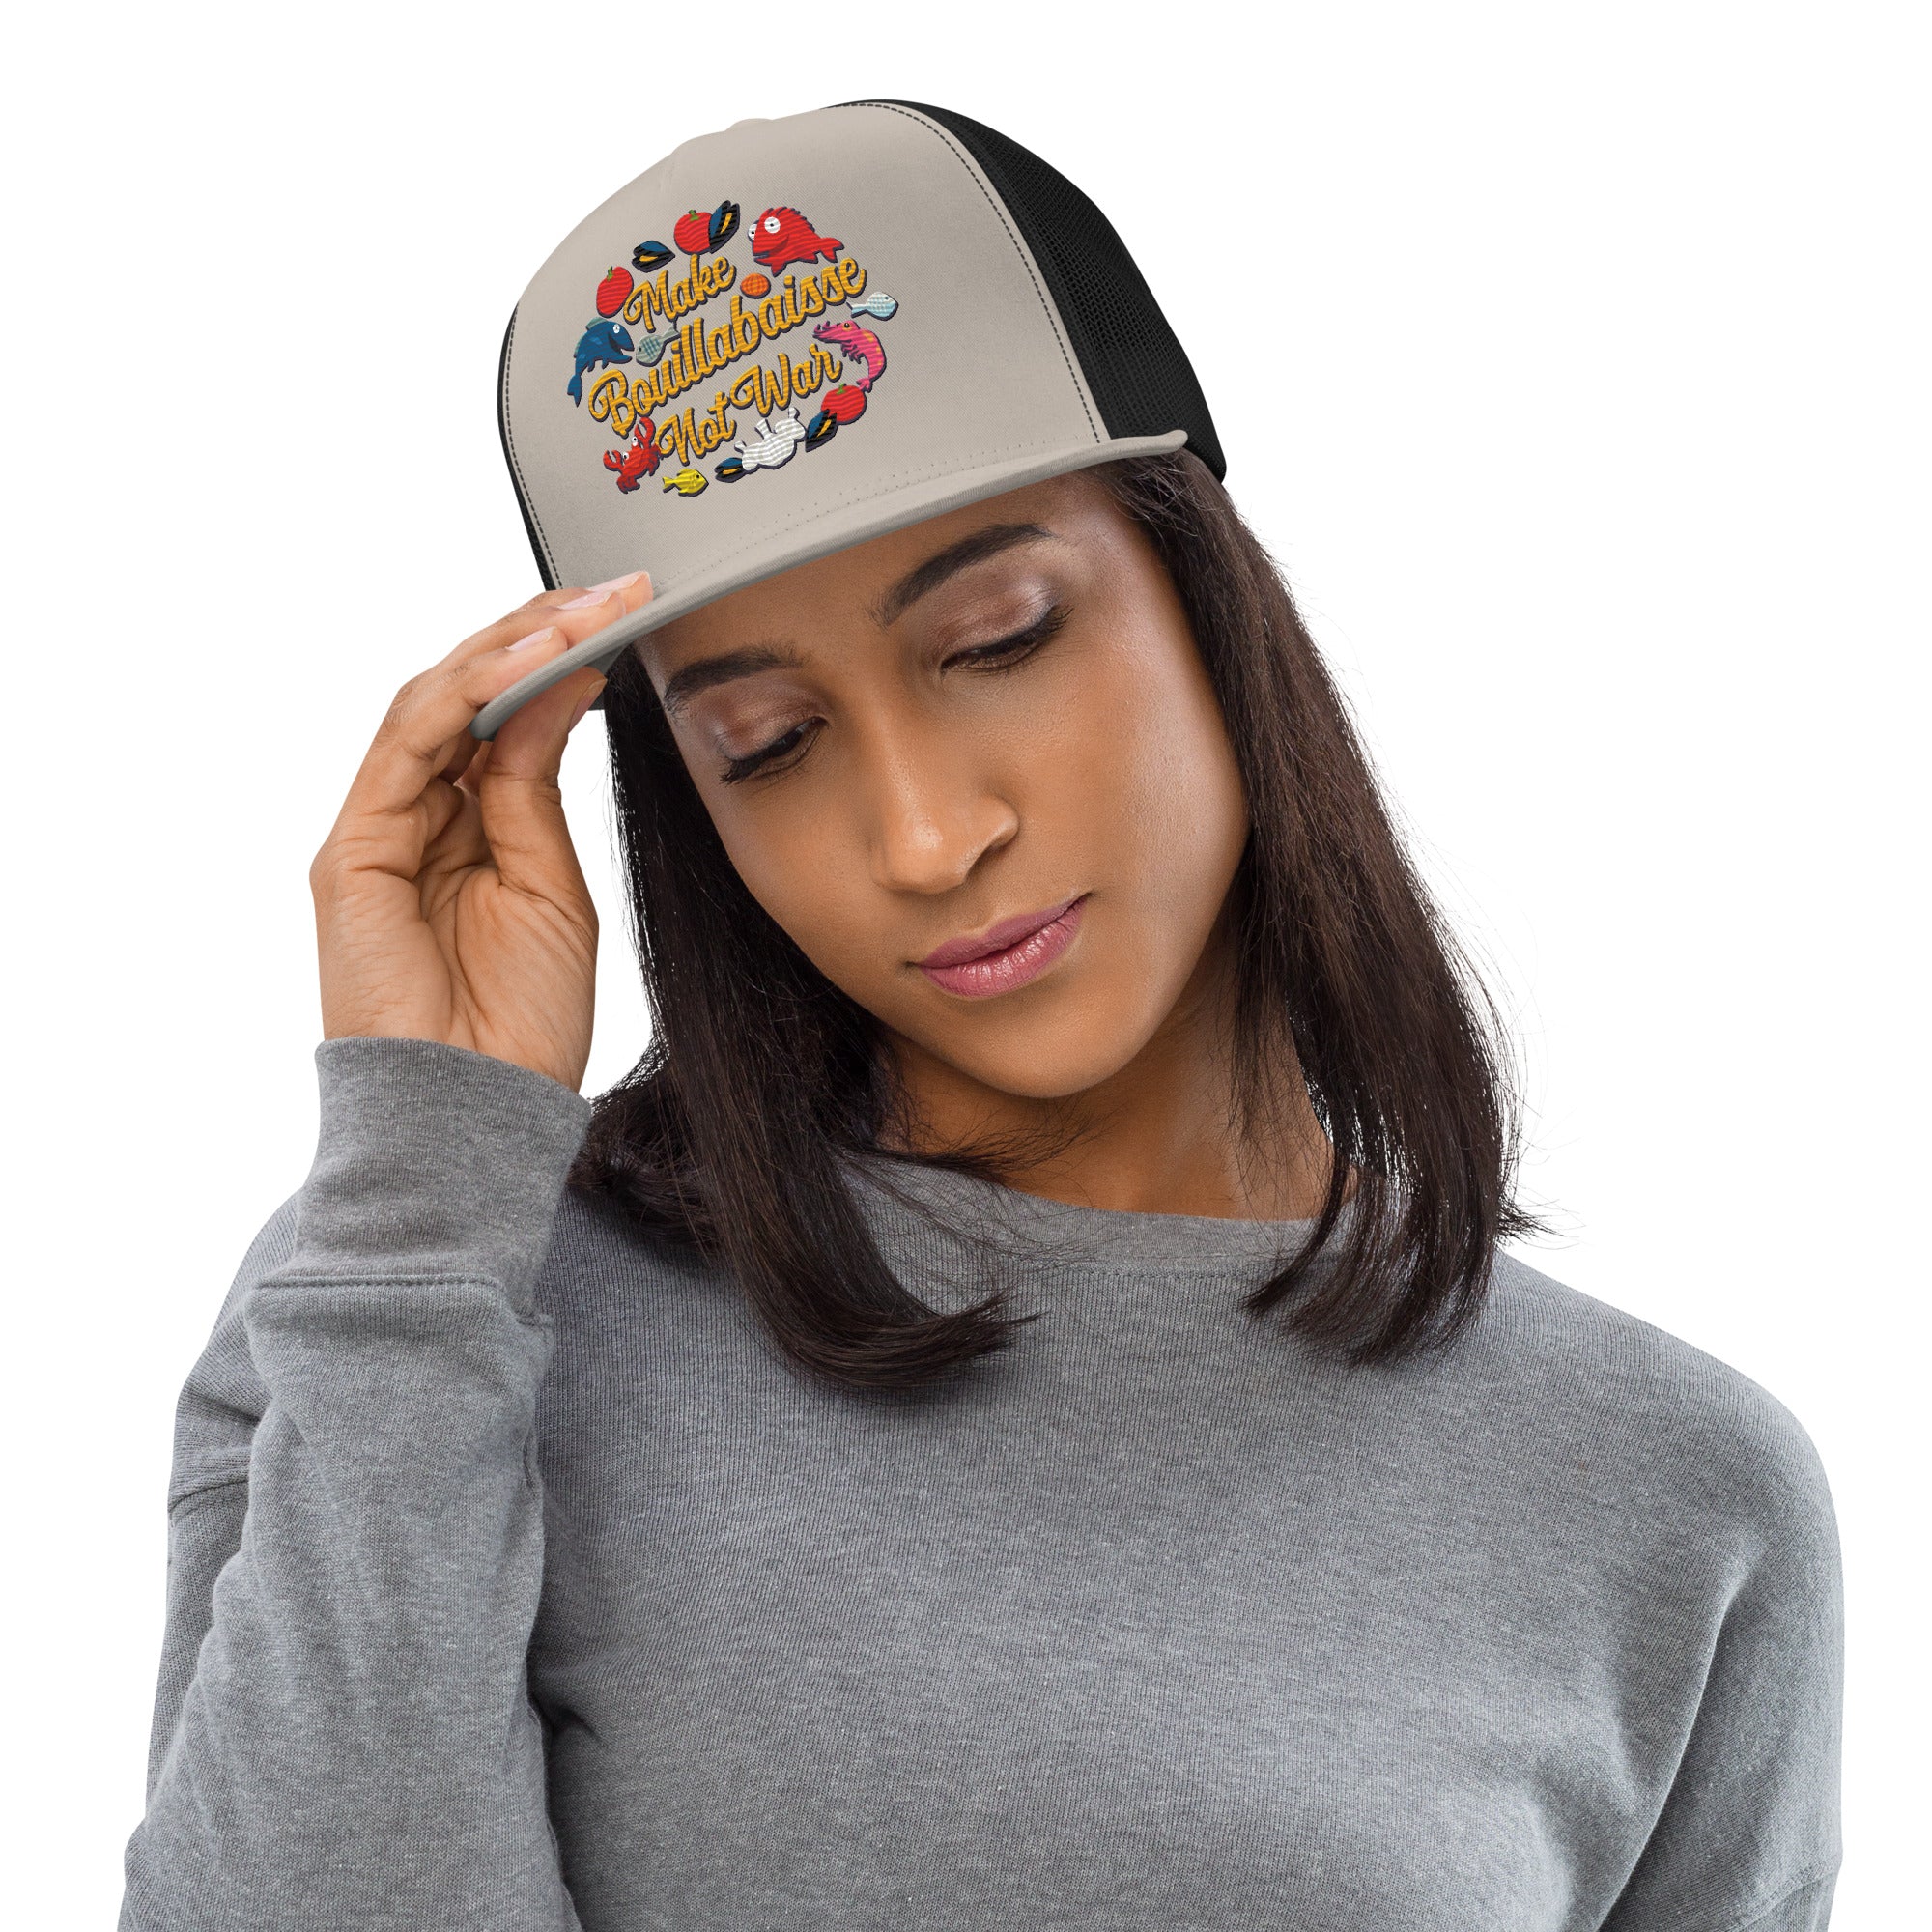 Two-Tone Trucker Make Bouillabaisse Not War multicolor embroidered pattern